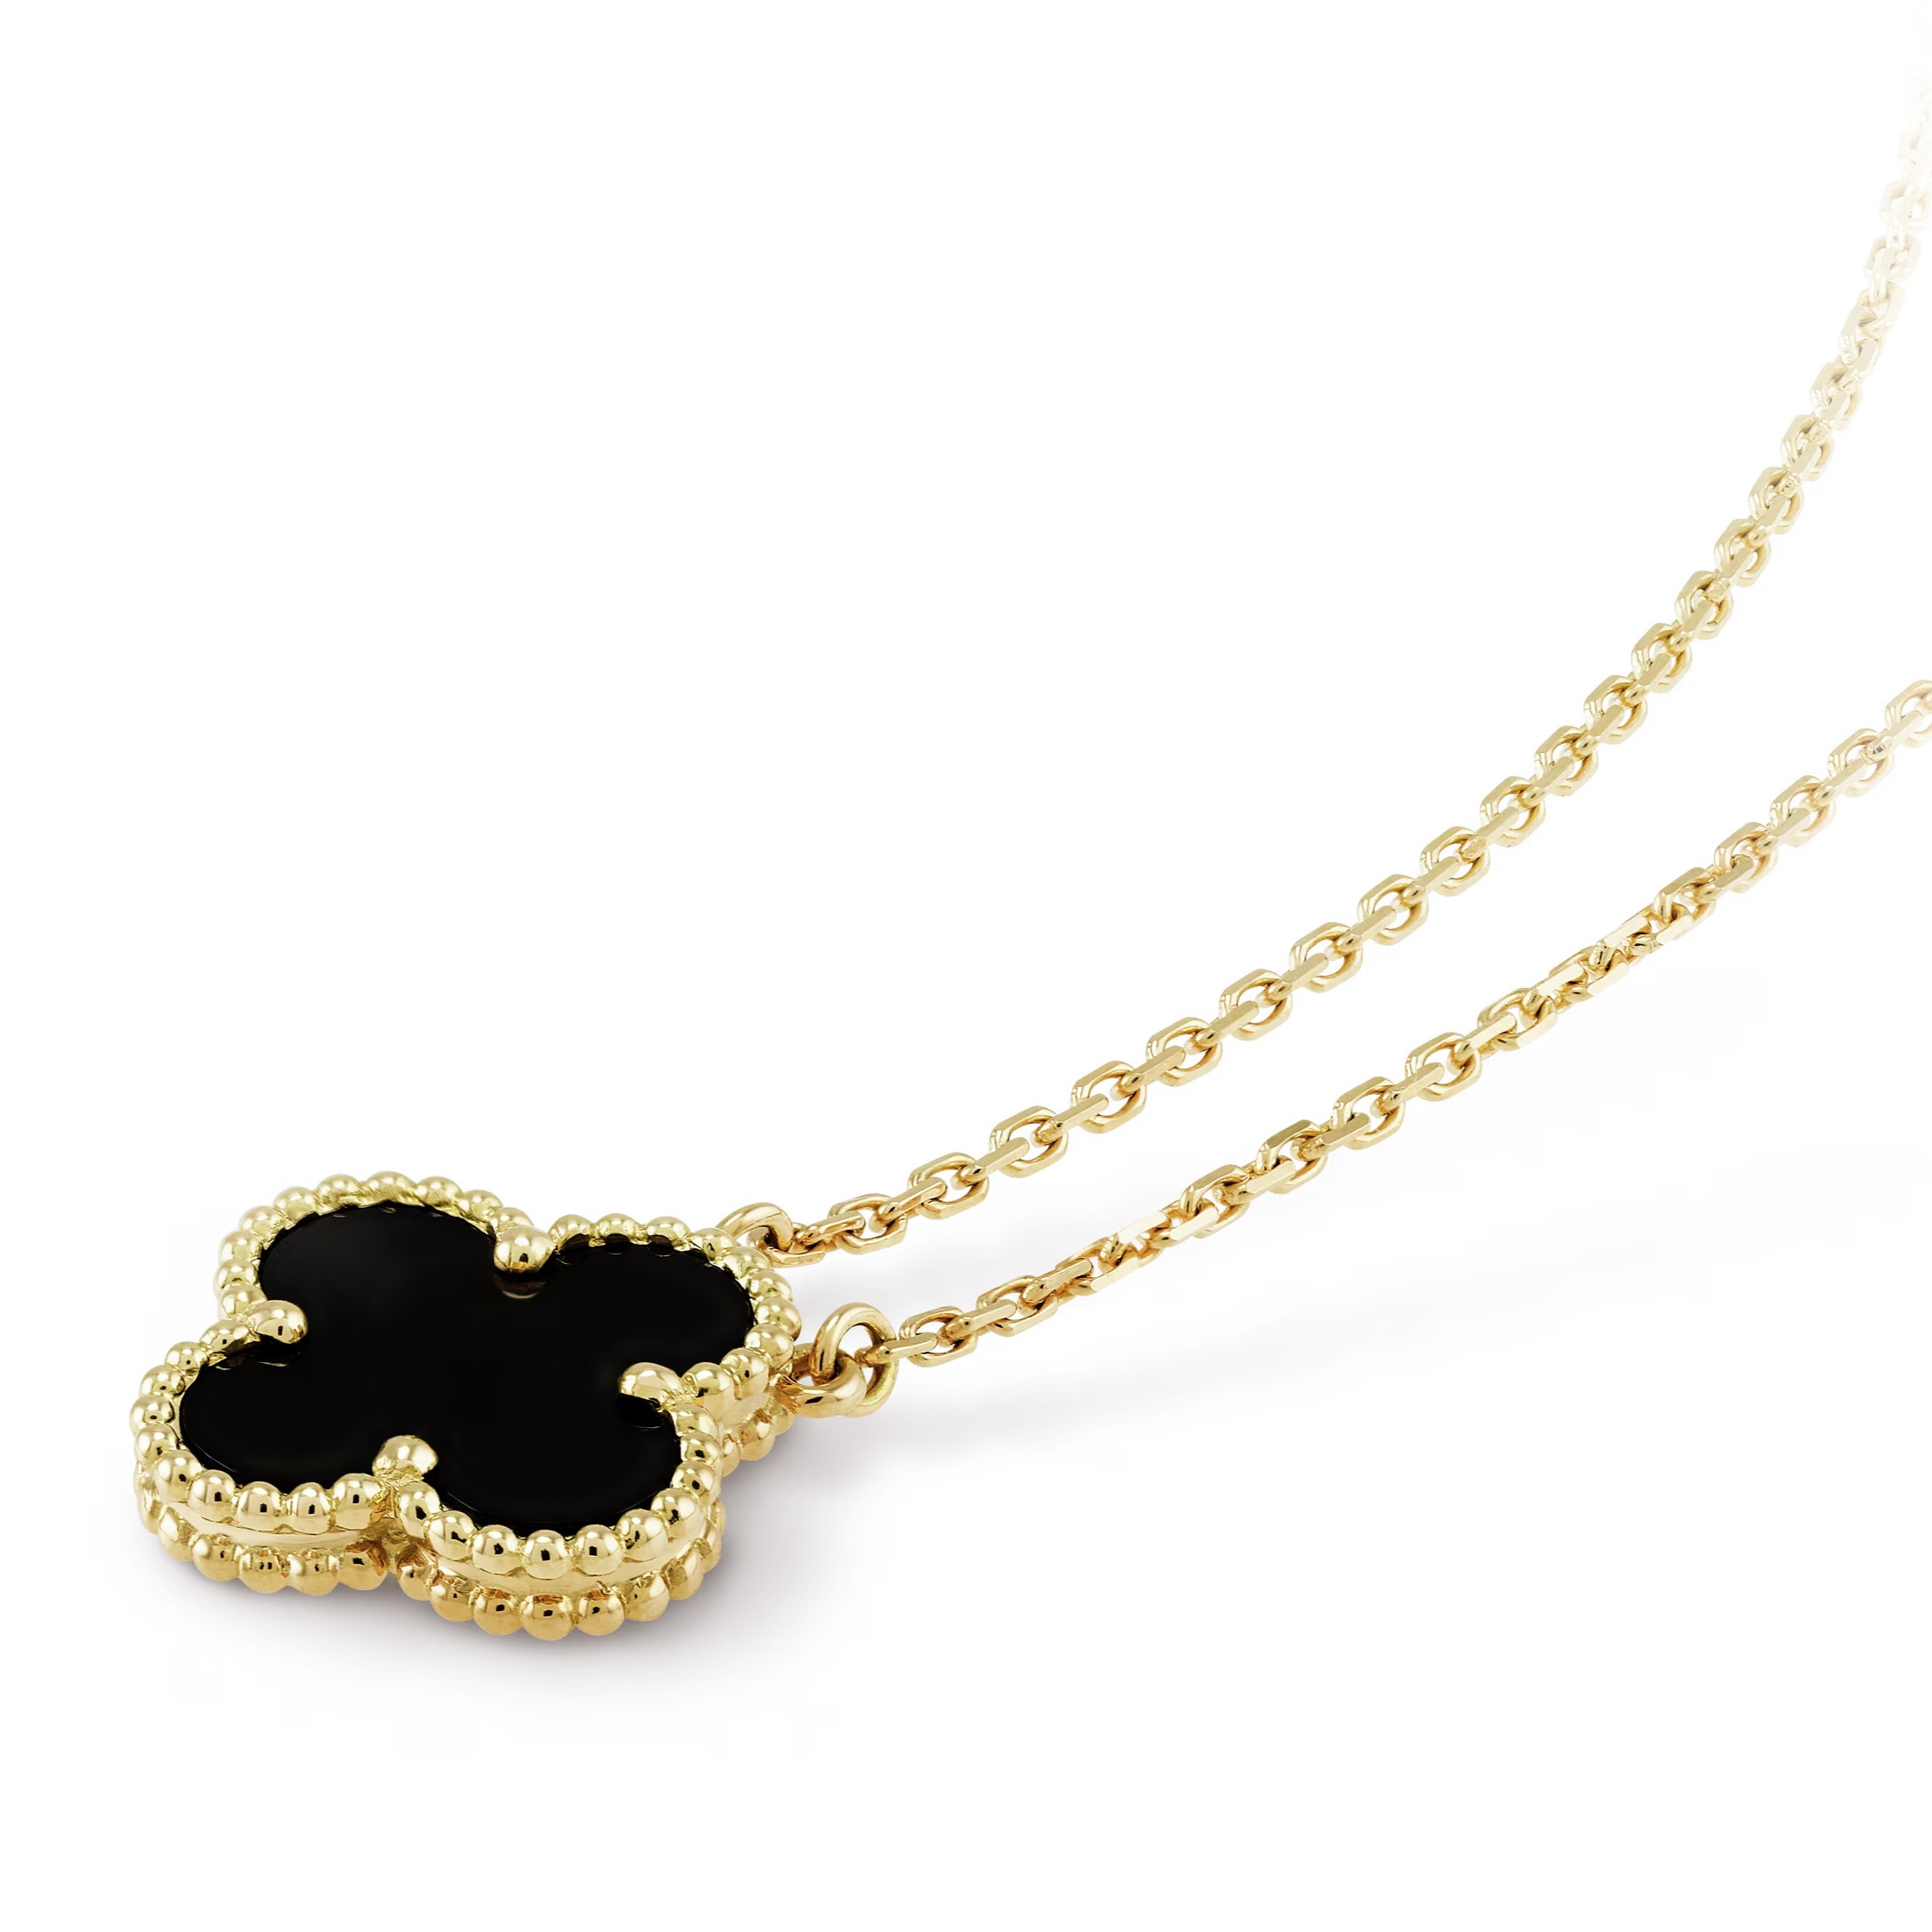 DÂY CHUYỀN VAN CLEEF & ARPELS VINTAGE ALHAMBRA NECKLACE PENDANT IN GOLD VCARA45800 4